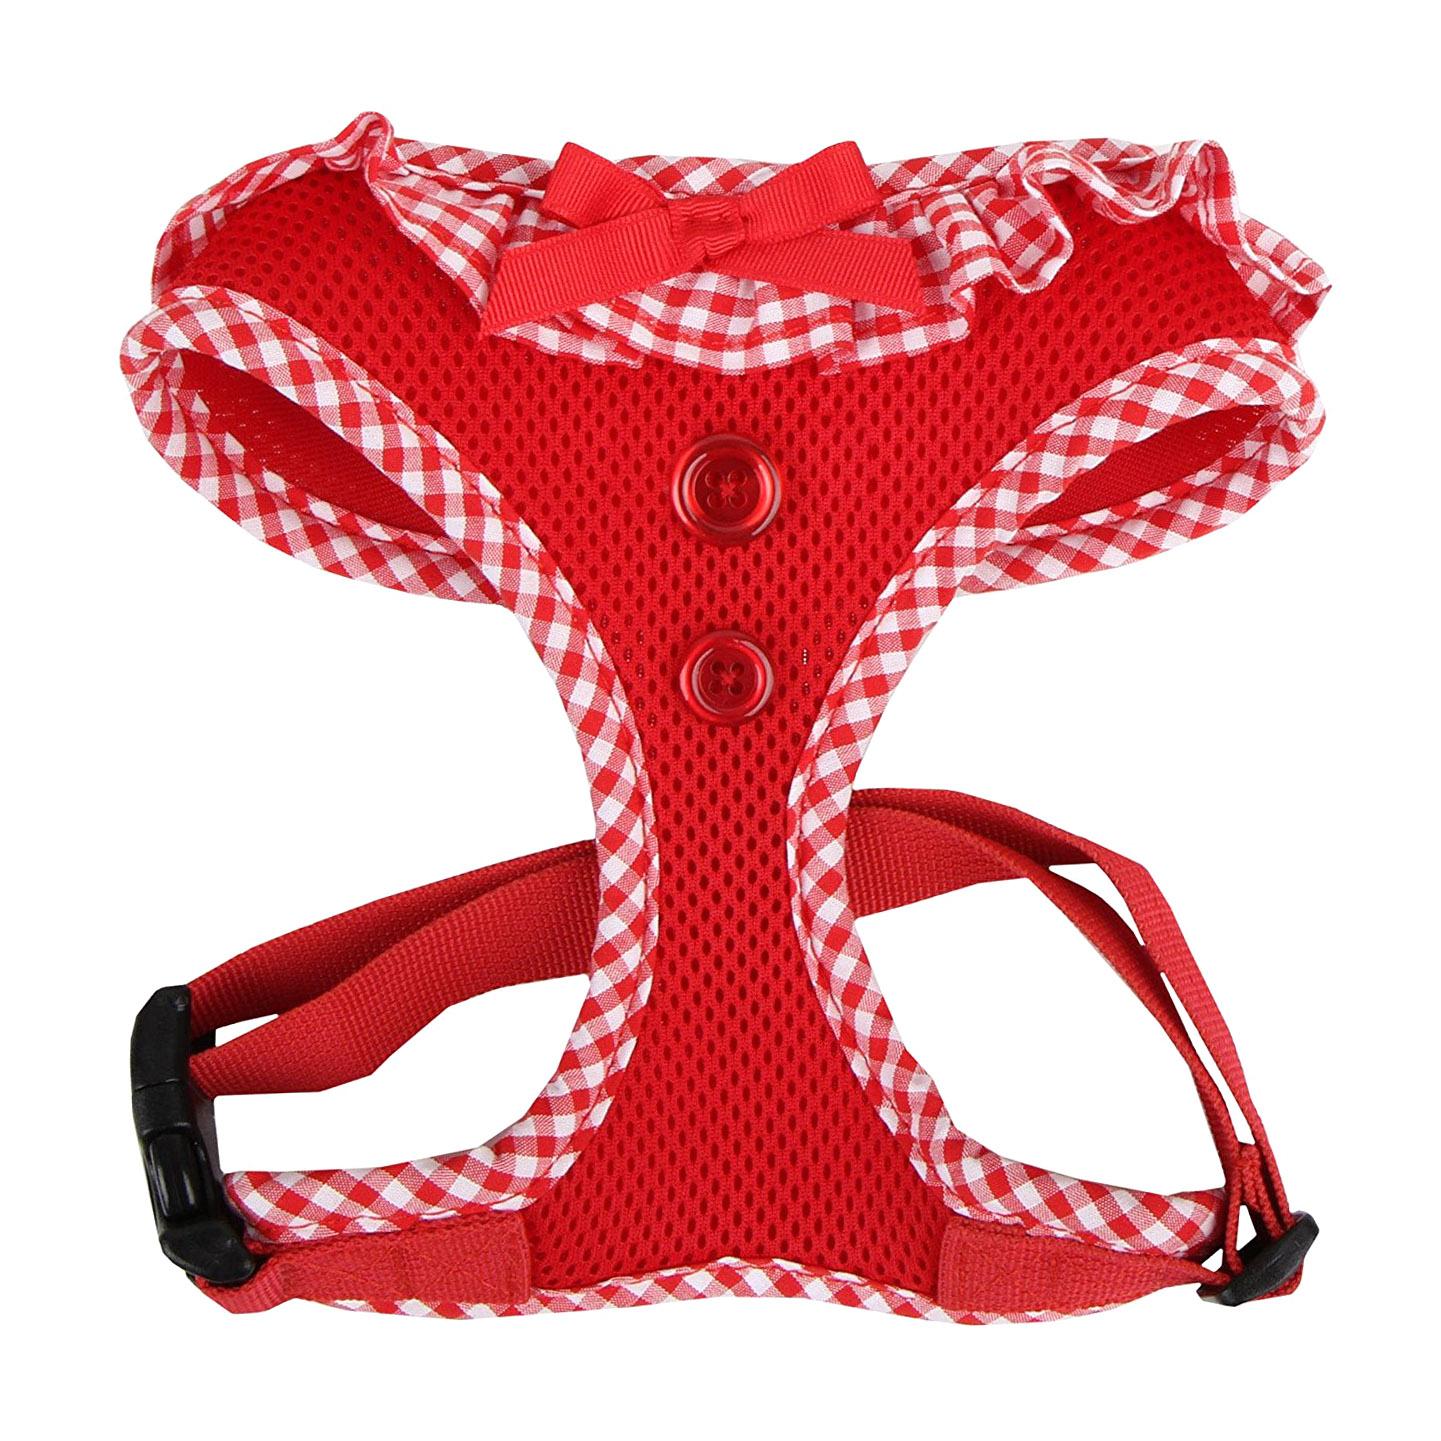 Vivien Dog Harness by Puppia - Red